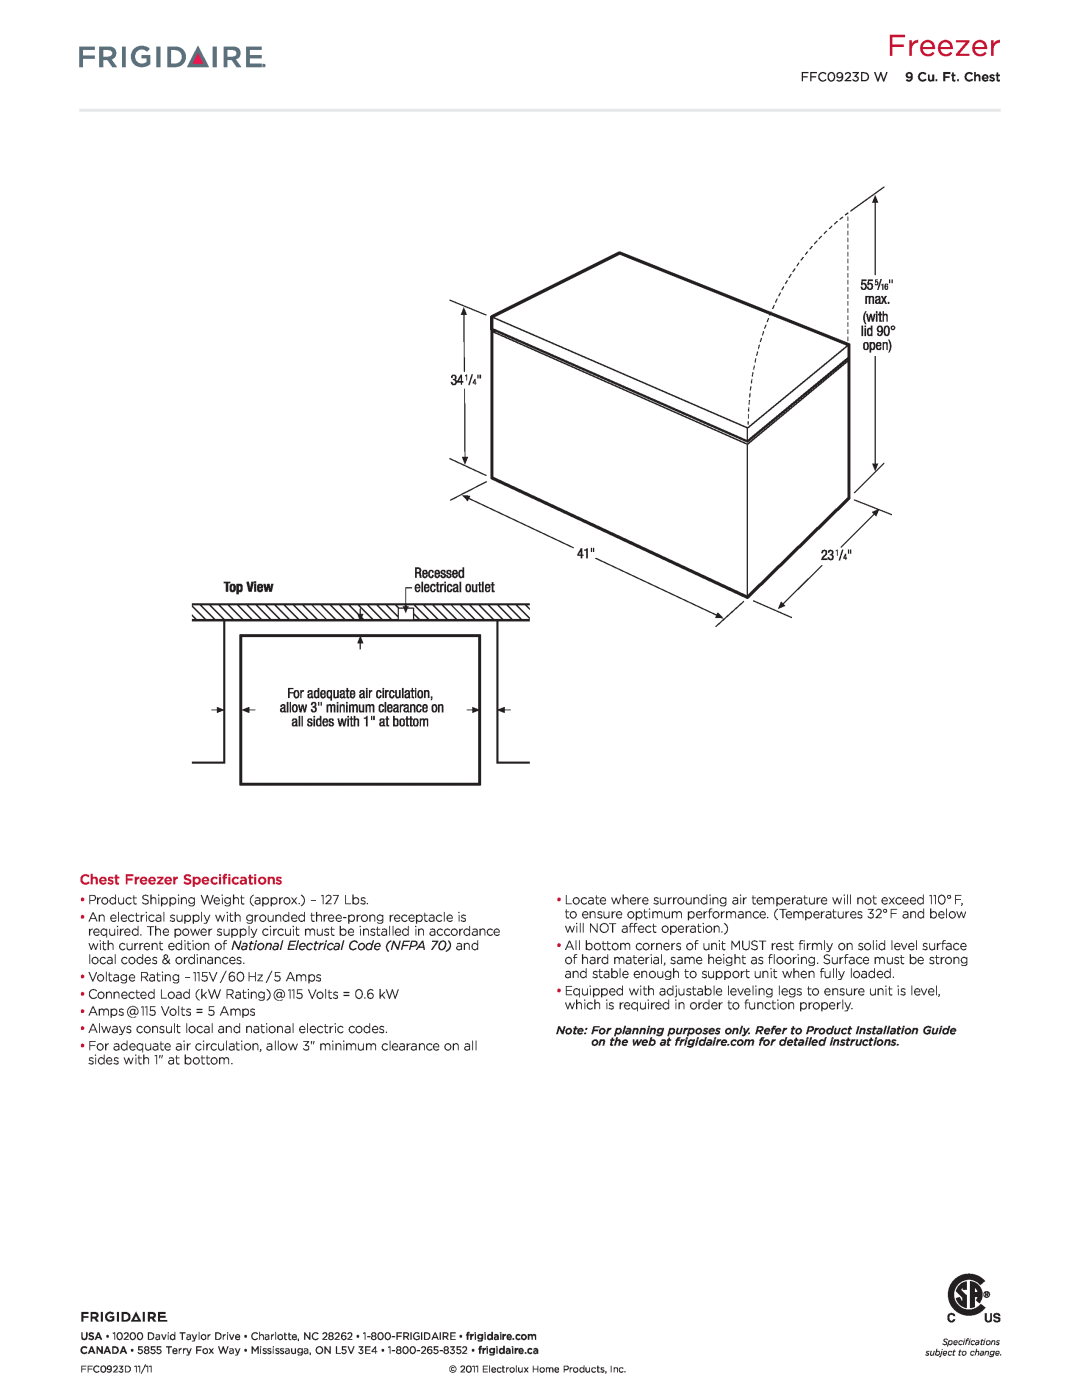 Frigidaire FFC0923D W dimensions Chest Freezer Specifications 